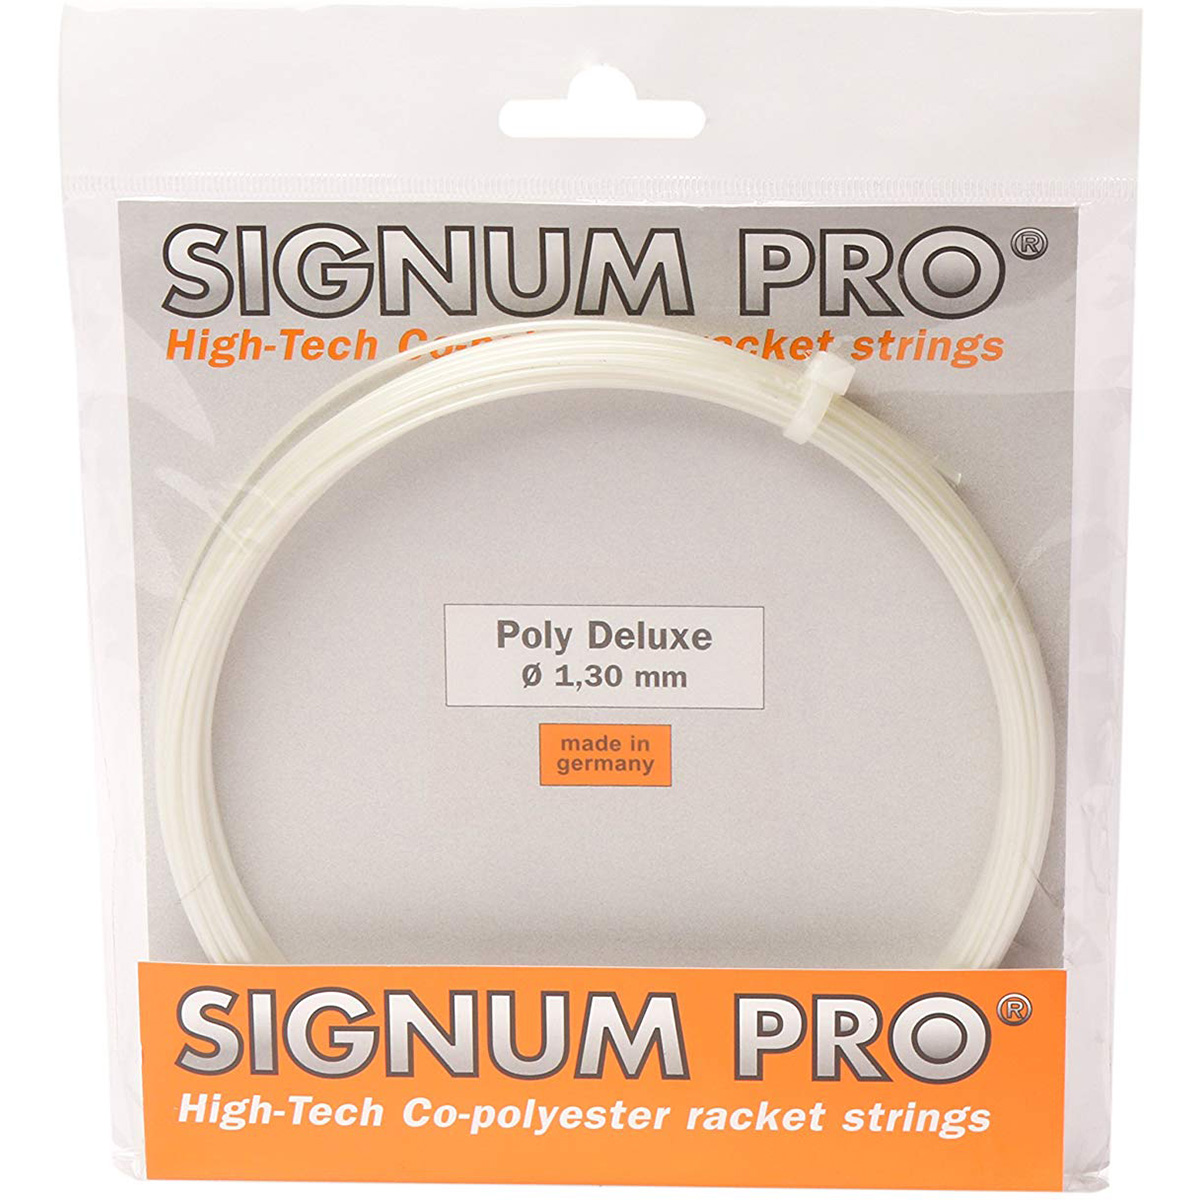 Signum Pro Poly Deluxe 16 String Set (12 m) - White